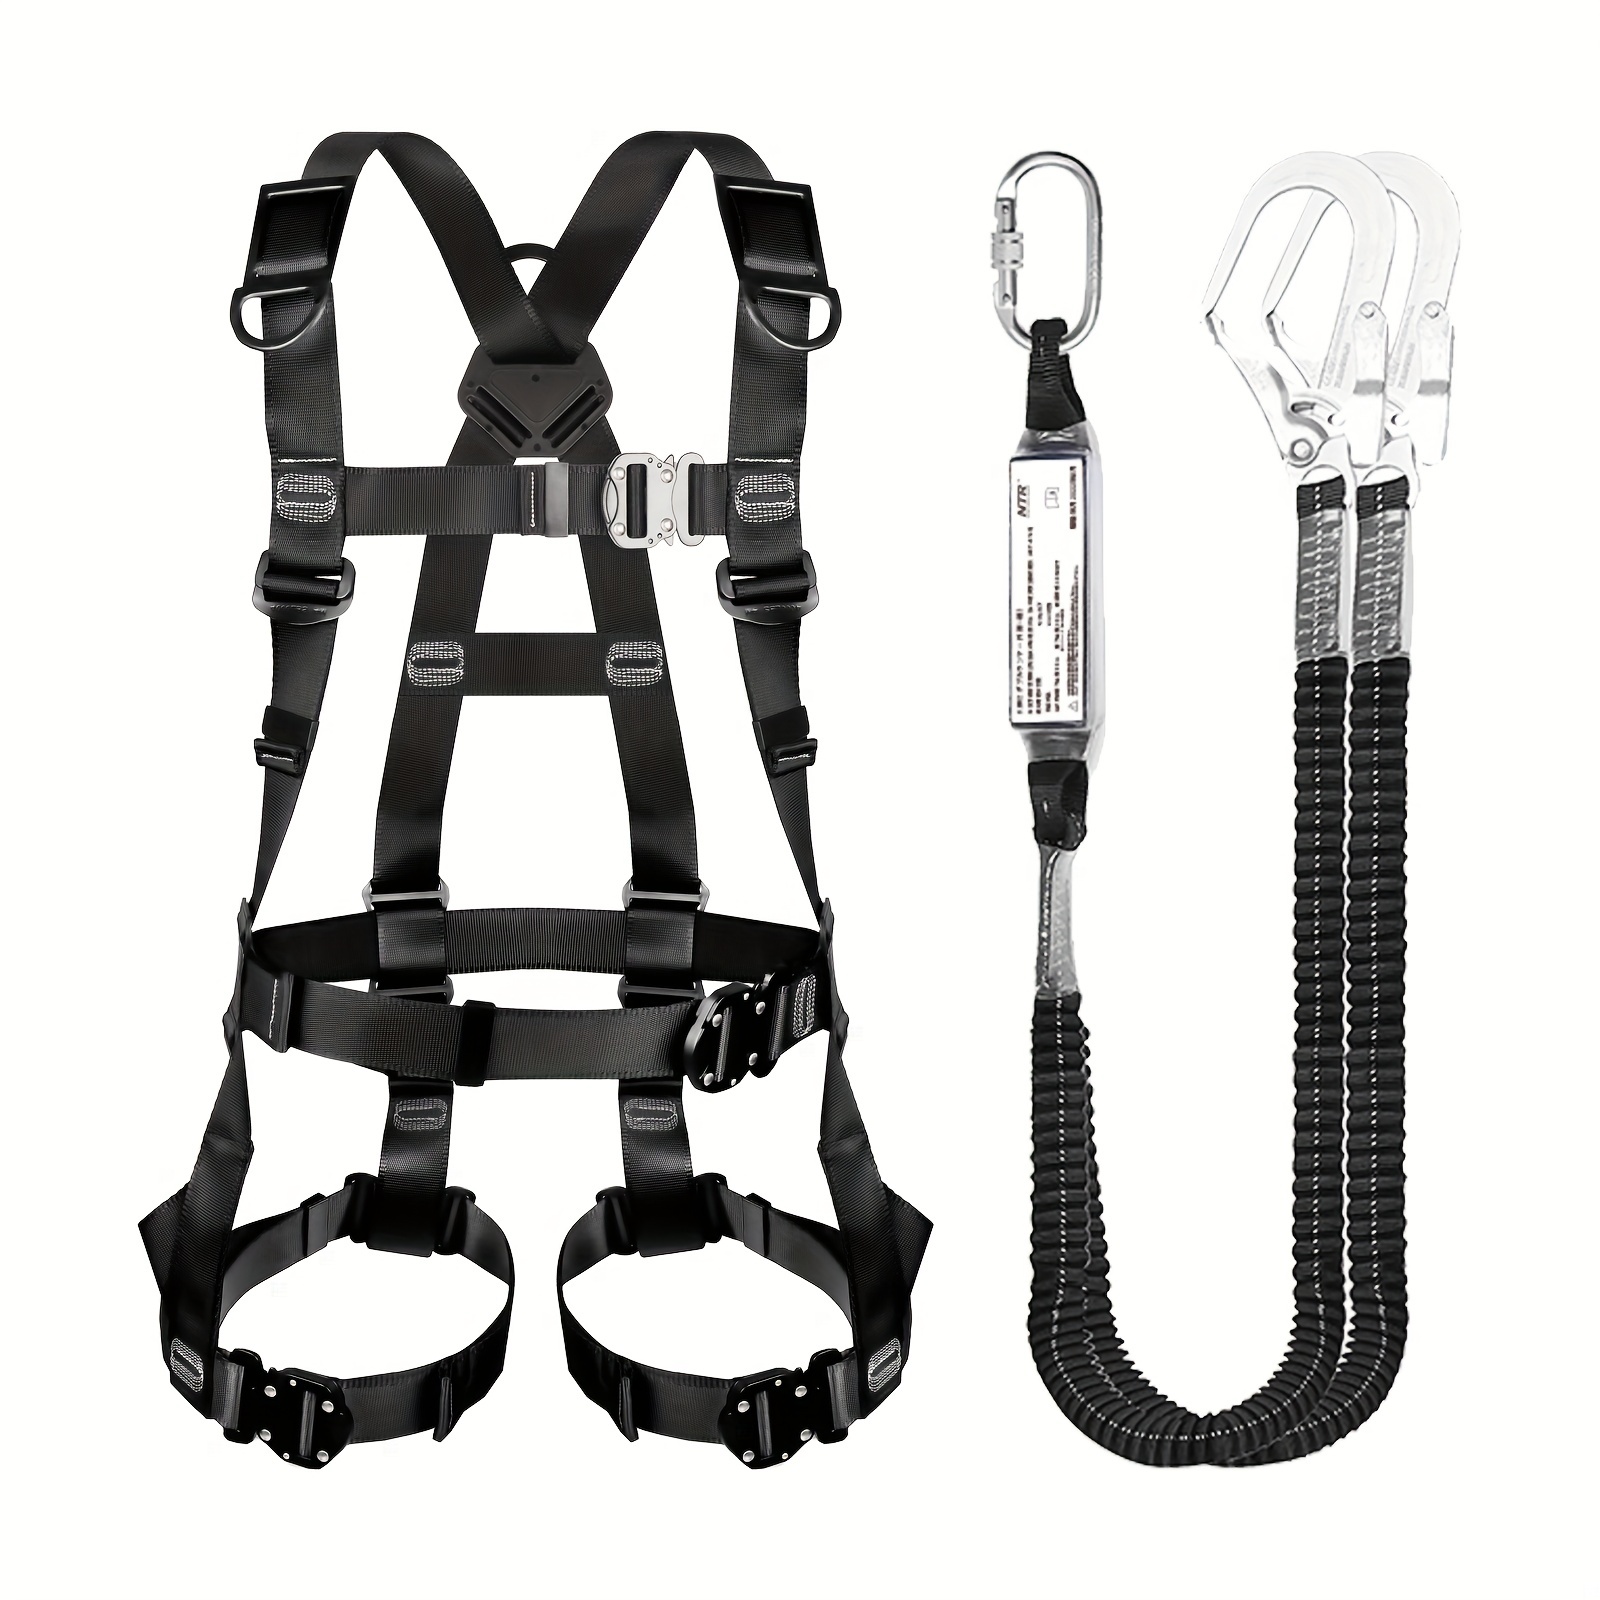 Full harness safety belt new standard set Belly, chest and legs One-touch  buckle & easily detachable safety harness safety belt new standard set